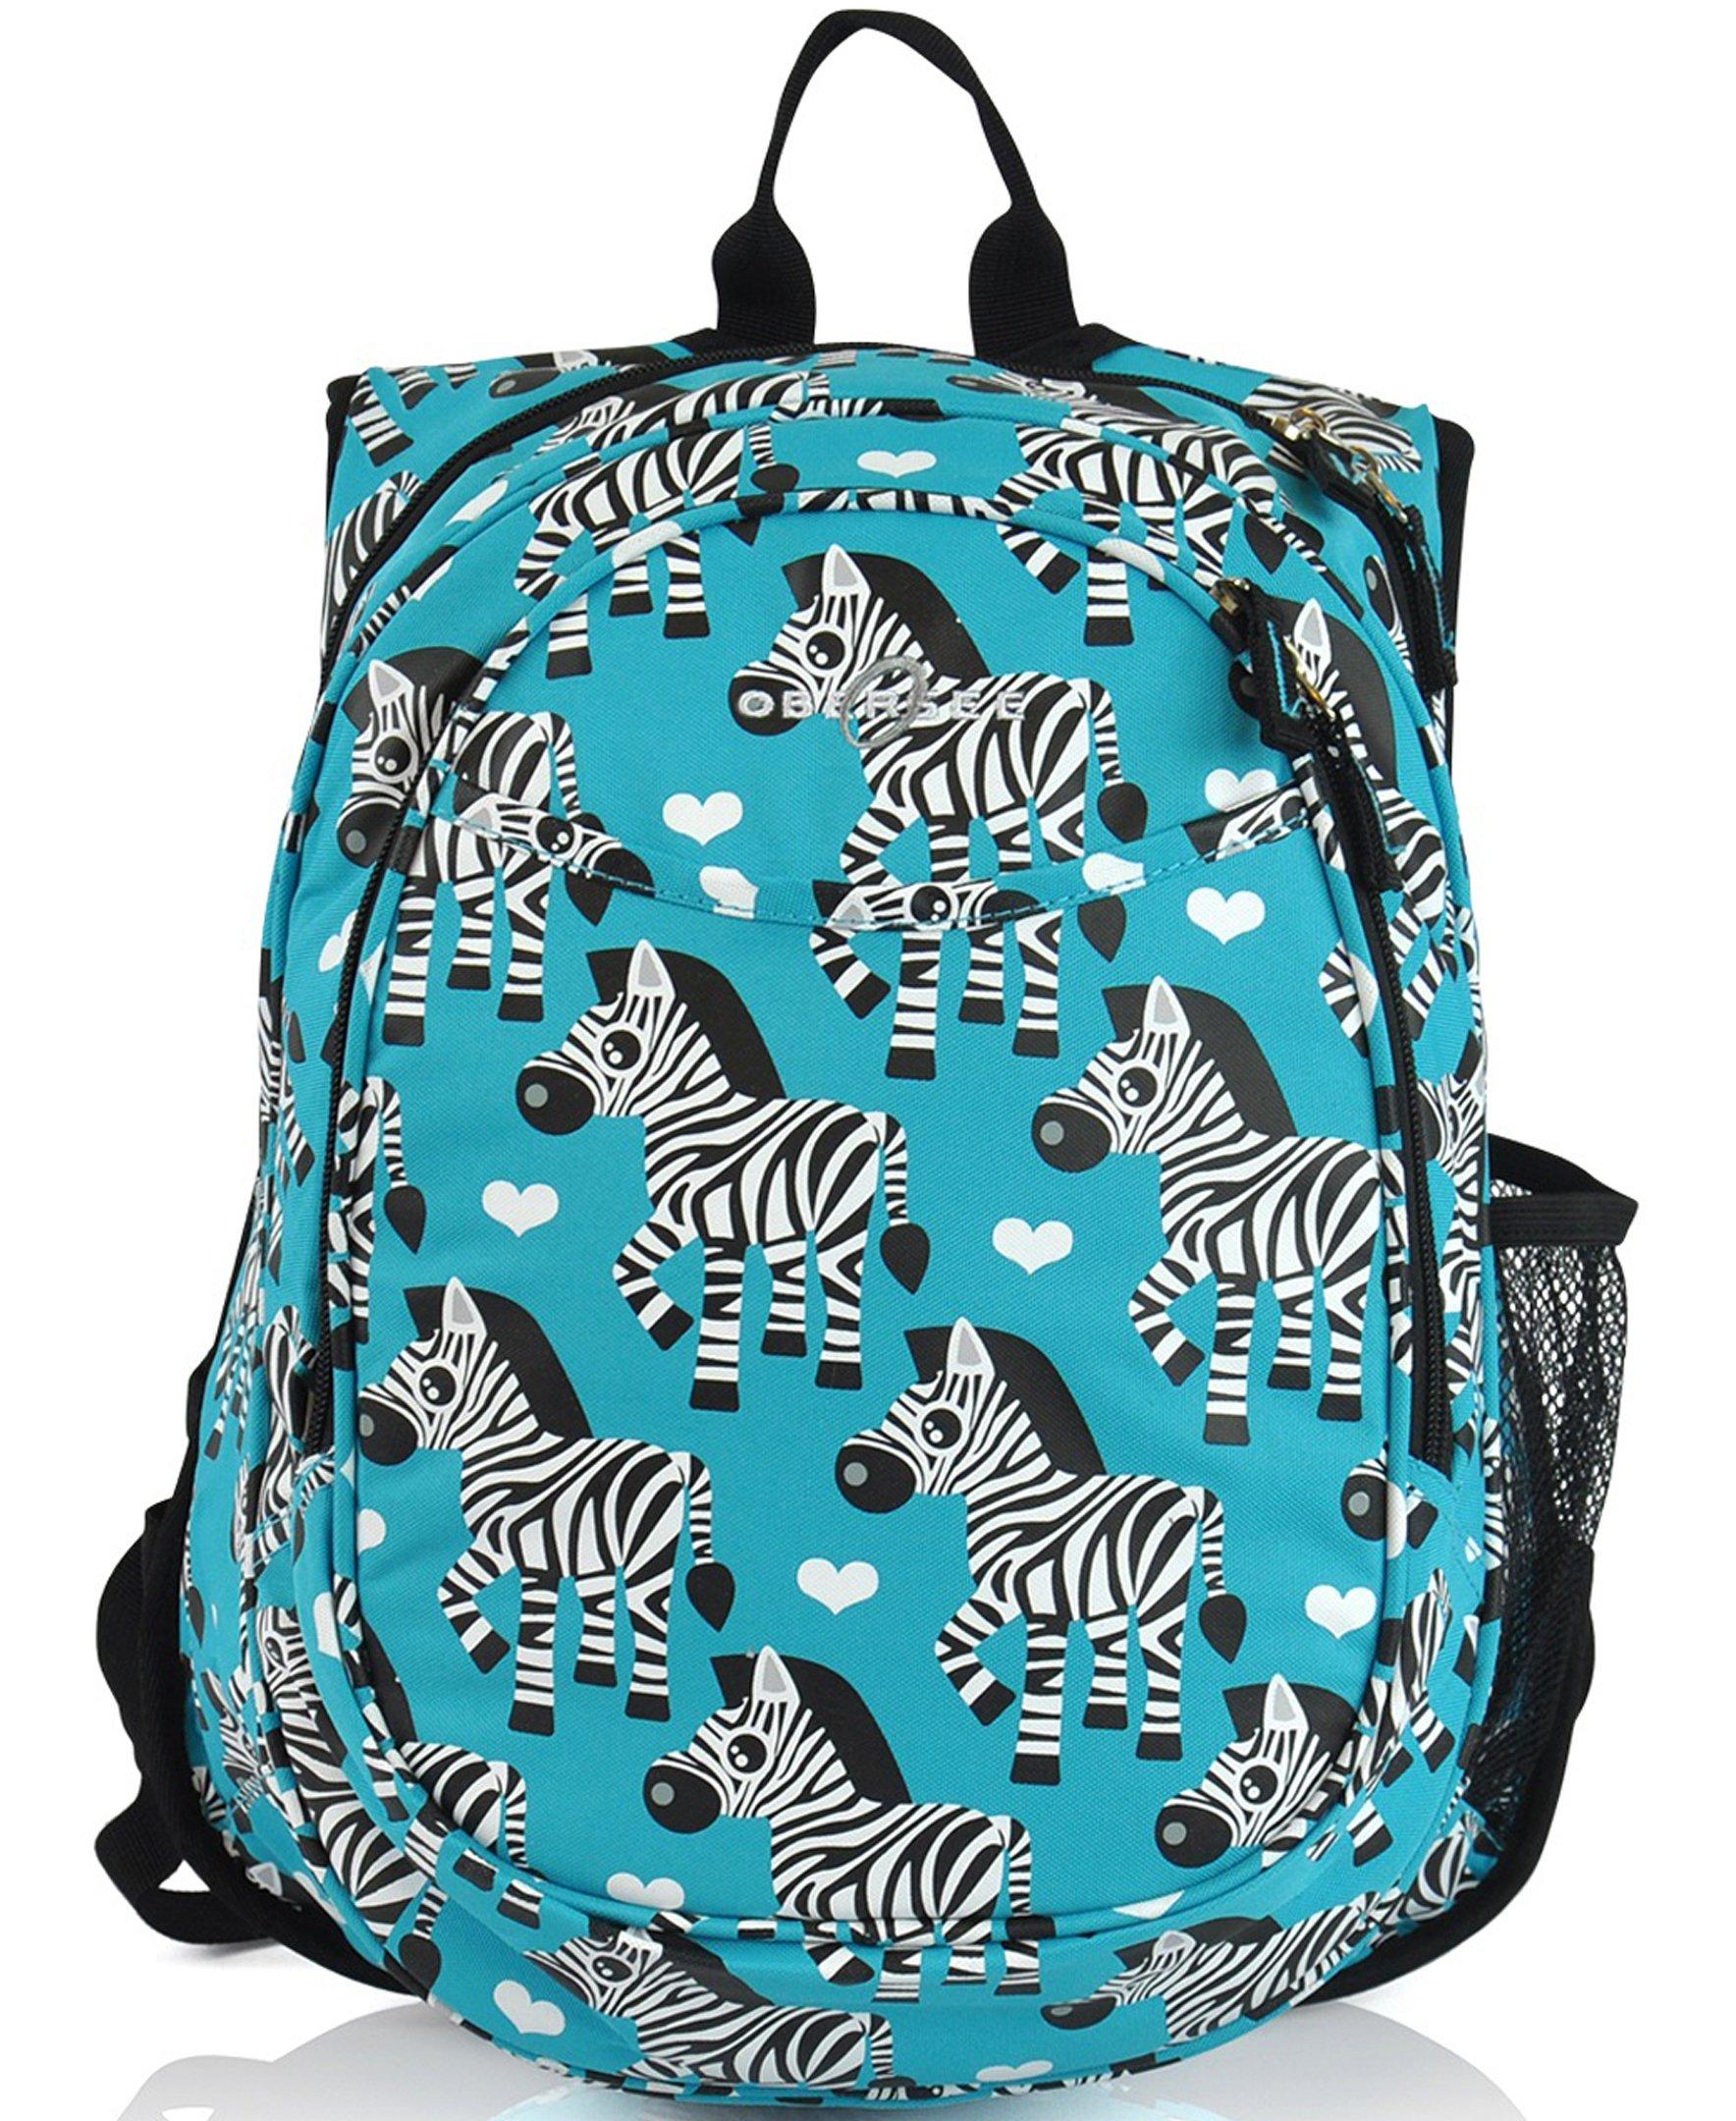 O3KCBP021 Obersee Mini Preschool All-in-One Backpack for Toddlers and Kids with integrated Insulated Cooler | Zebra - image 1 of 5